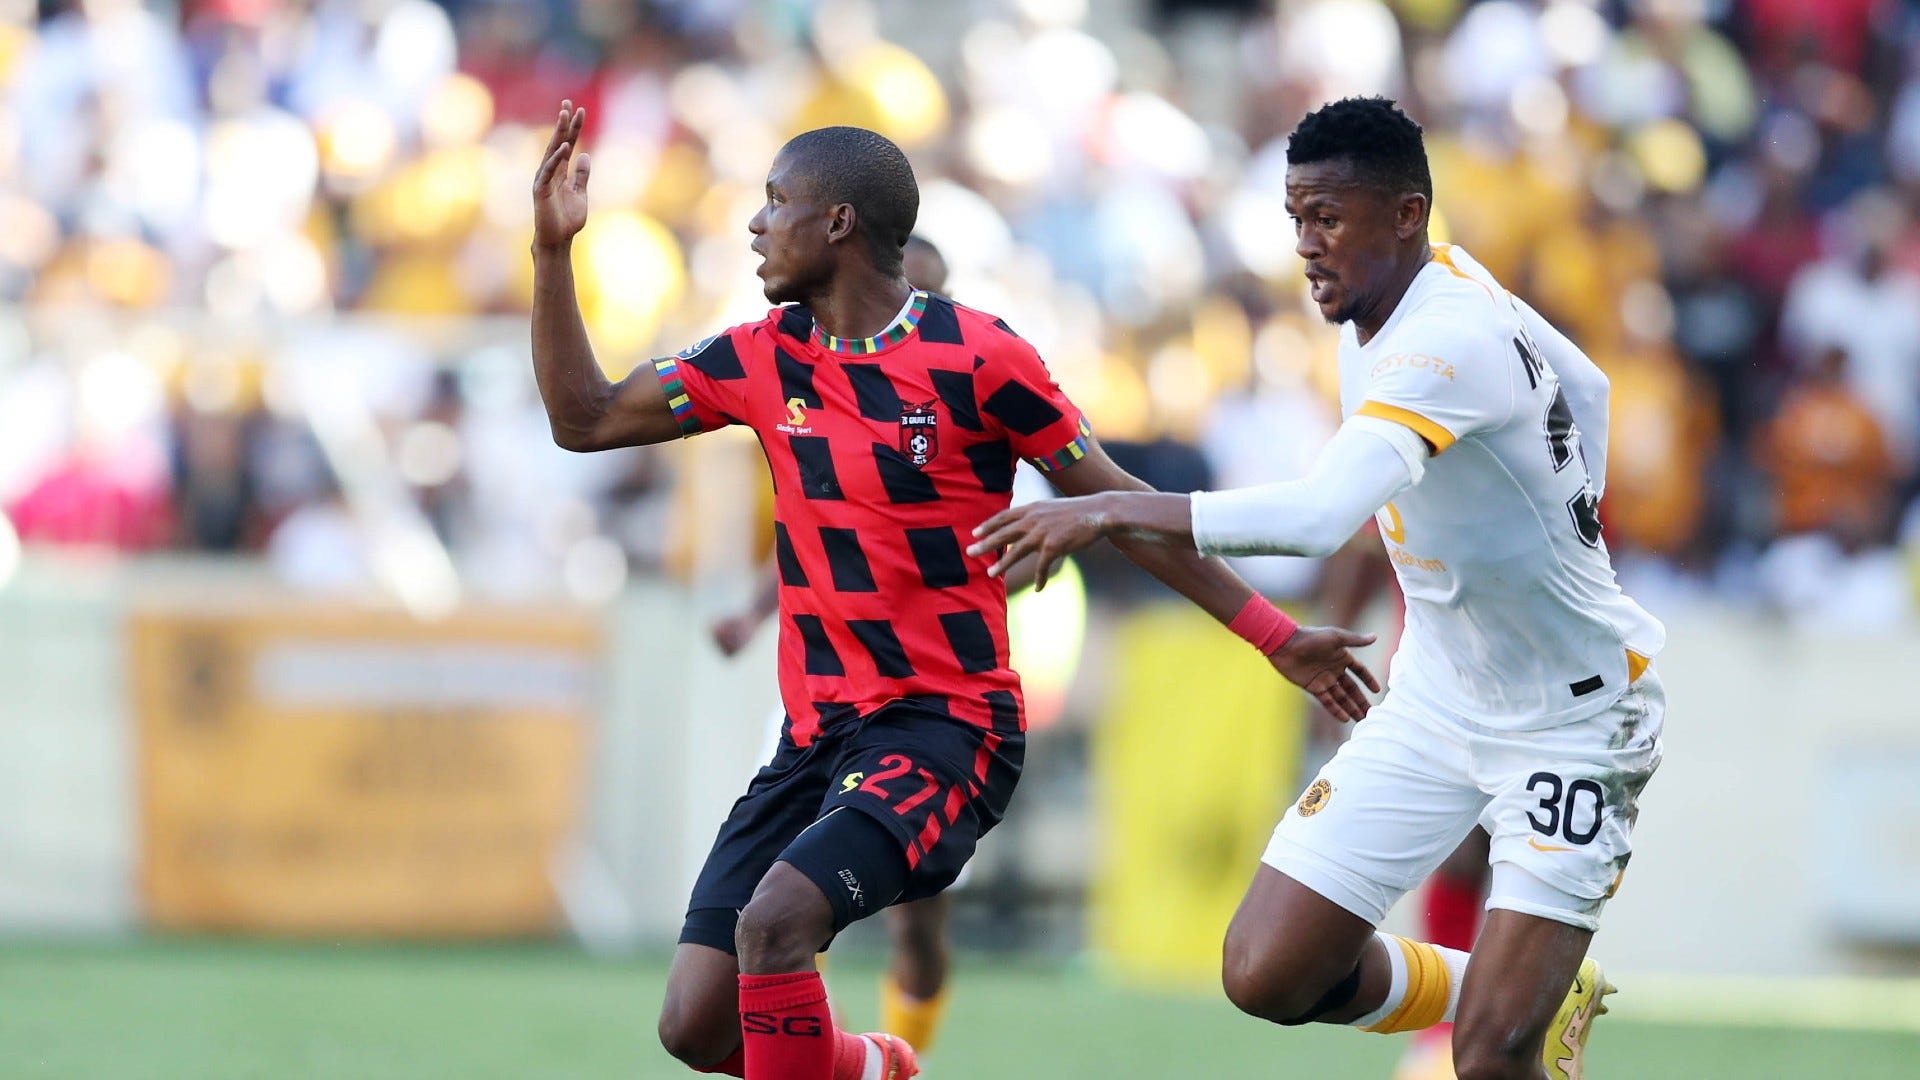  Kaizer Chiefs failed to take advantage of their numerical superiority over TS Galaxy who held the Soweto giants to a 0 0 draw in Sunday s PSL clash WHAT HAPPENED The Soweto giants were left to rue to their missed chances in a match played at Mbombela Stadium with the two teams having drawn 2 2 in the first round league clash last October in Johannesburg Chiefs started the match brightly and they created the better chances but they were frustrated by Galaxy s Bosnian goalkeeper Vasilije Kolak who pulled off fabulous saves to deny Keagan Dolly and Sifiso Hlanti before Ashley du Preez missed a sitter The visitors continued to dominate the game after the restart putting the Rockets defence under pressure The hosts were reduced to 10 players after Marks Munyai was dismissed for making a reckless challenge on Bonfils Caleb Bimenyimana who had to be substituted due to the bone crunching tackle Galaxy then sat back and stood firm thwarting Chiefs who were limited to long range shots which either missed the target or were easily gathered by Kolak Ultimately the game ended in a 0 0 draw and Galaxy moved up to the 10th spot on the PSL standings after containing a blunt Chiefs side ALL EYES ON Siyabonga Ngezana as the tall centre back surprisingly started at right back ahead of Zitha Kwinika with full backs Dillan Solomons and Reeve Frosler out injured Ngezana produced a solid performance as a makeshift right back neutralizing his former teammate Bernard Parker and Sphiwe Mahlangu who were operating in the left side of the Galaxy attack The 25 year old also made a promising overlapping runs and delivered some decent crosses but his Amakhosi teammates were wasteful in front of goal THE BIGGER PICTURE Chiefs are now undefeated in their last two matches but they failed to make it two wins in a row against Galaxy having brushed aside Royal AM 2 0 last weekend The draw against the Rockets saw Amakhosi remain fifth on the PSL standings as they missed a chance to leapfrog fourth placed Orlando Pirates leaving the two local football heavyweights level on points They are both three points behind third placed Richards Bay as the race to finish in the top three spots hots up WHAT IS NEXT FOR CHIEFS The Glamour Boys will now travel to Harry Gwala Stadium where they are scheduled to face Maritzburg United in a Nedbank Cup Last 32 clash on Friday Chiefs are undefeated in their last four competitive matches against the Team of Choice and they will be looking to extend that run by securing a win in Pietermaritzburg Credit goal com You can read the original article here  